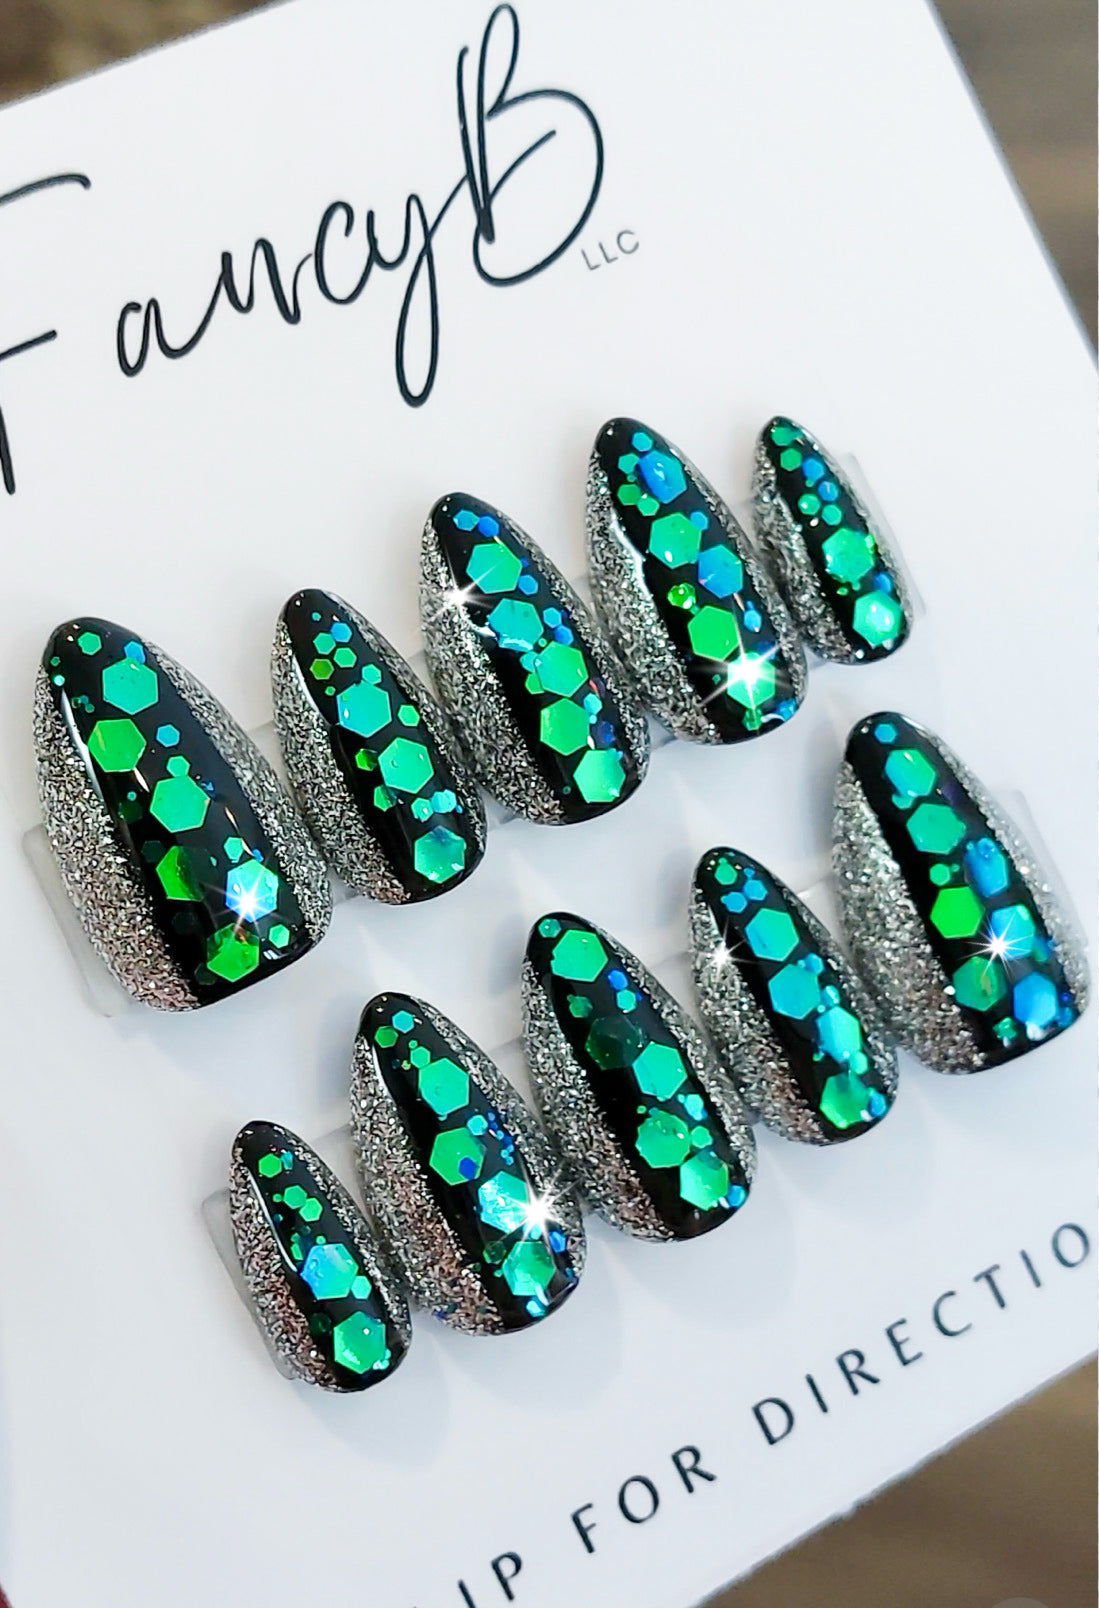 Custom glitter press on nails with teal blue and green chunky glitter with silver glitter on sides on short almond press on nails.